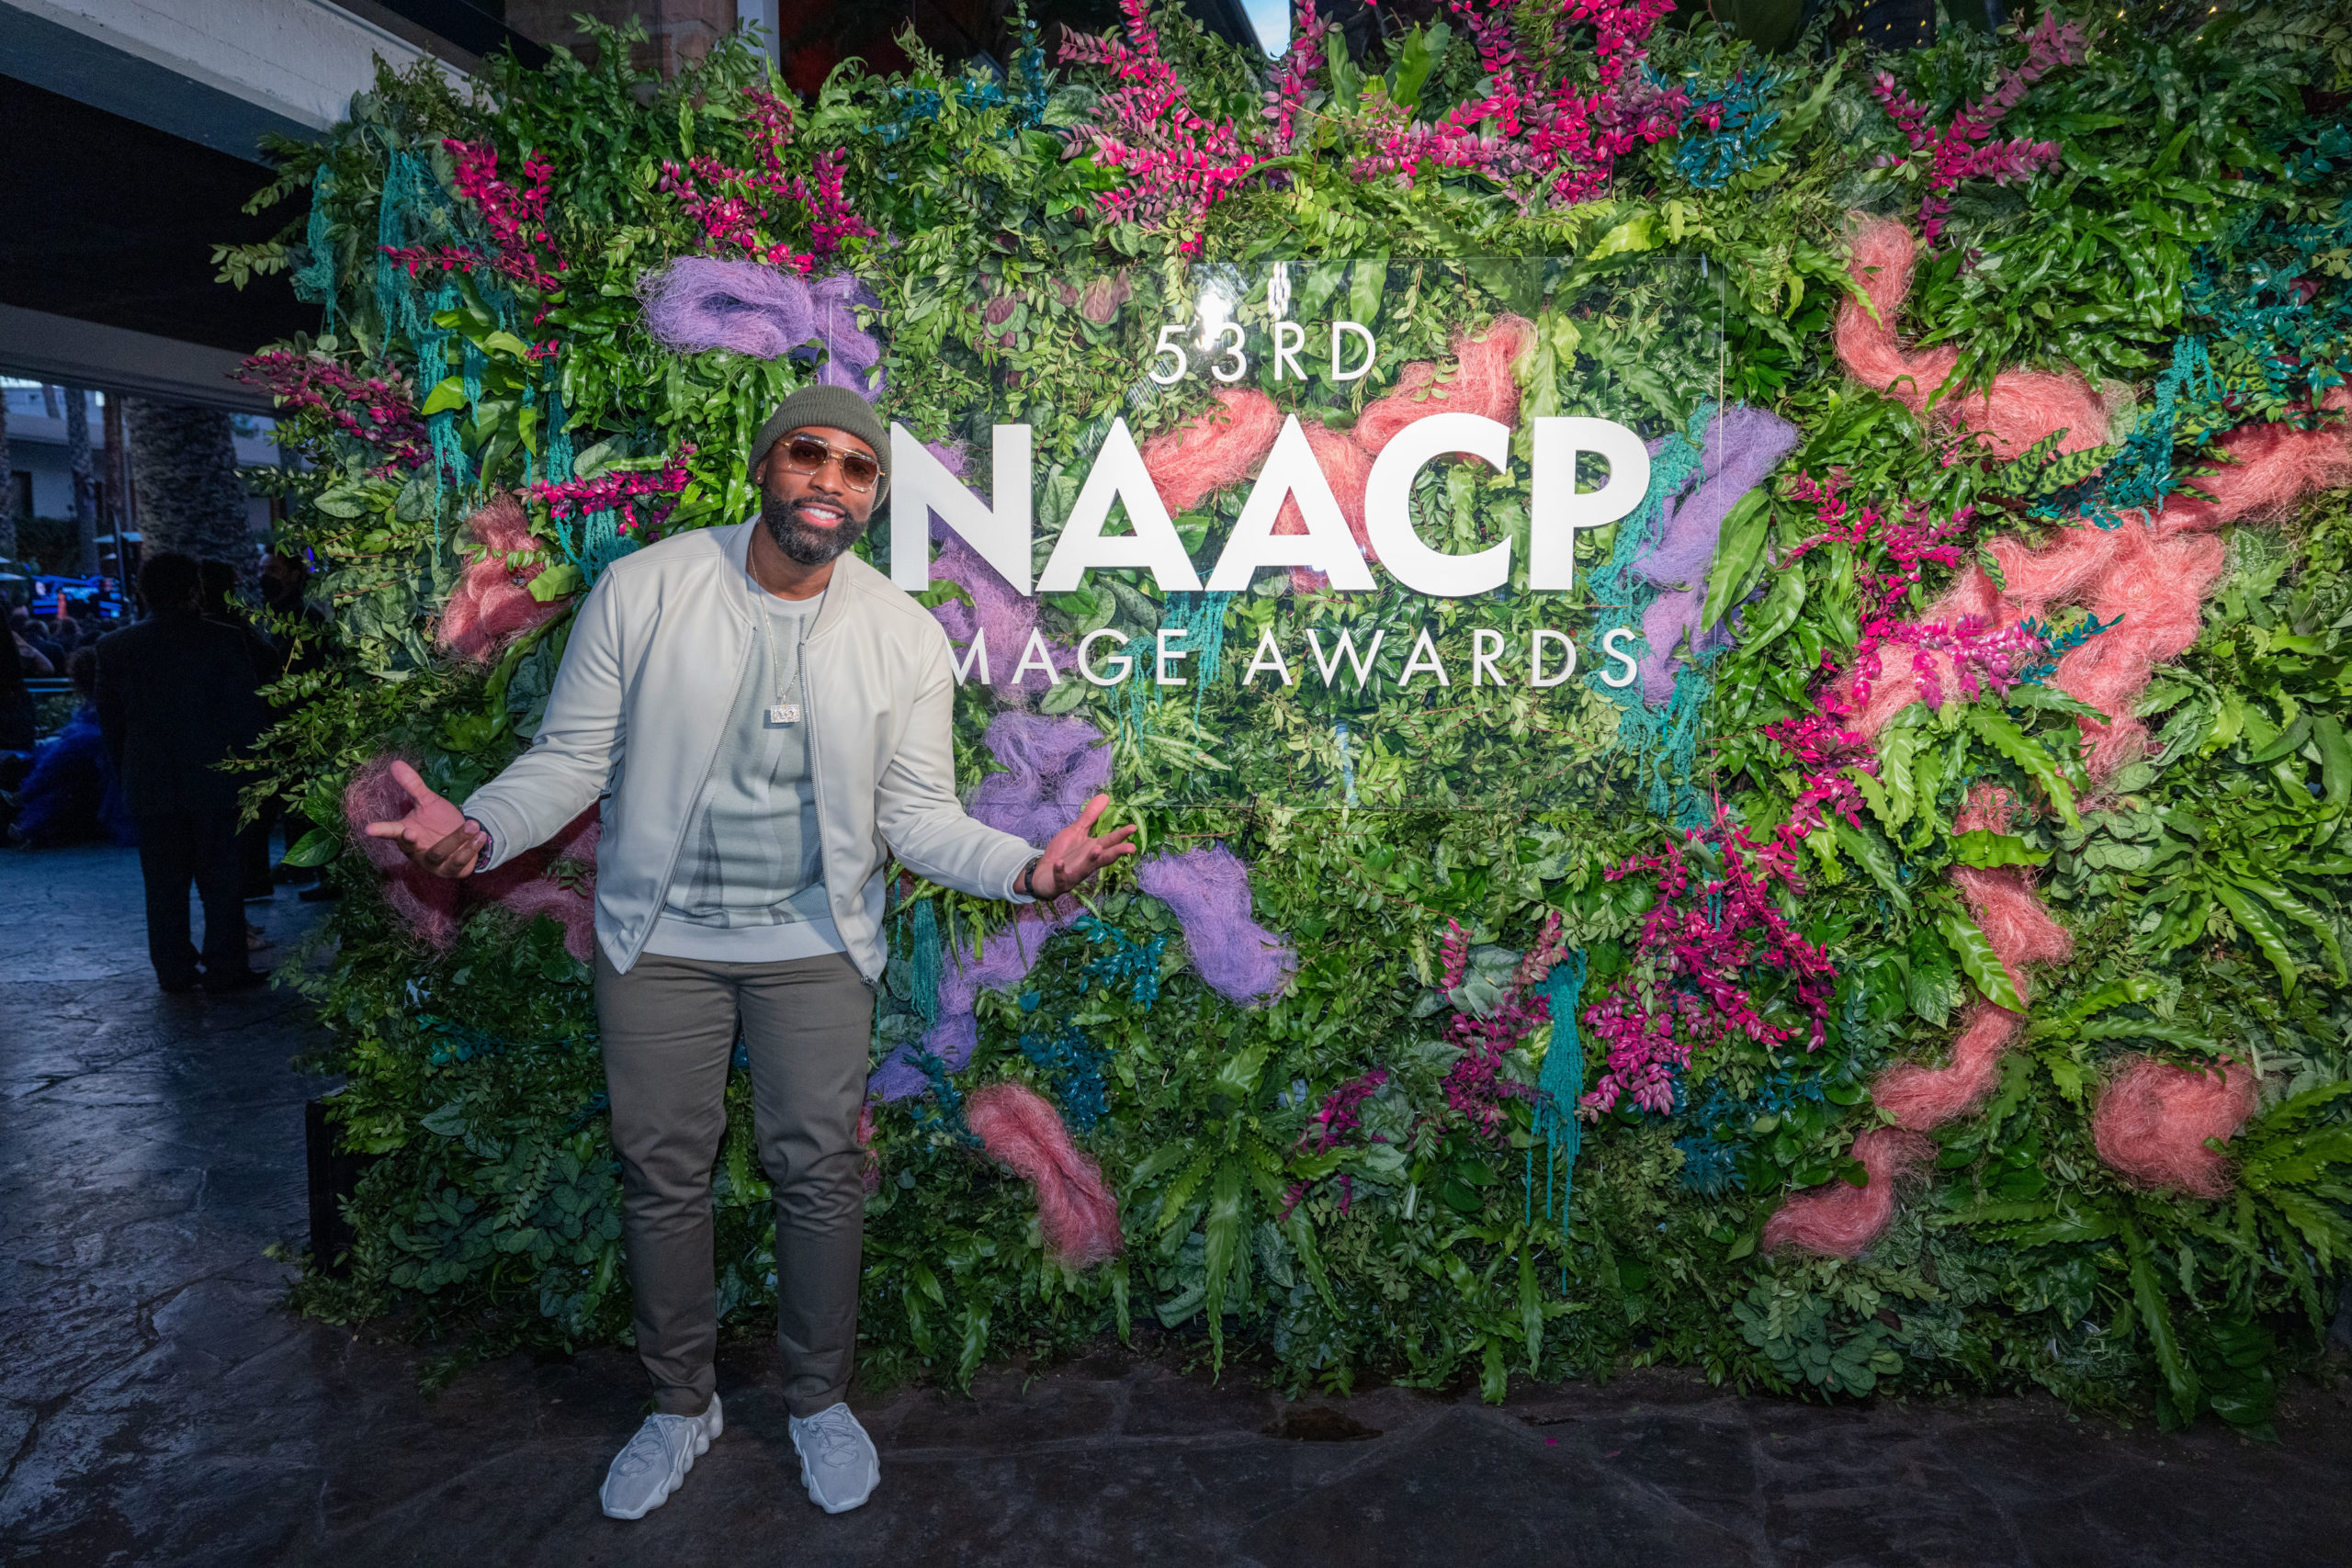 Isaac Yowman standing in front of floral wall that reads "53rd NAACP Image Awards"